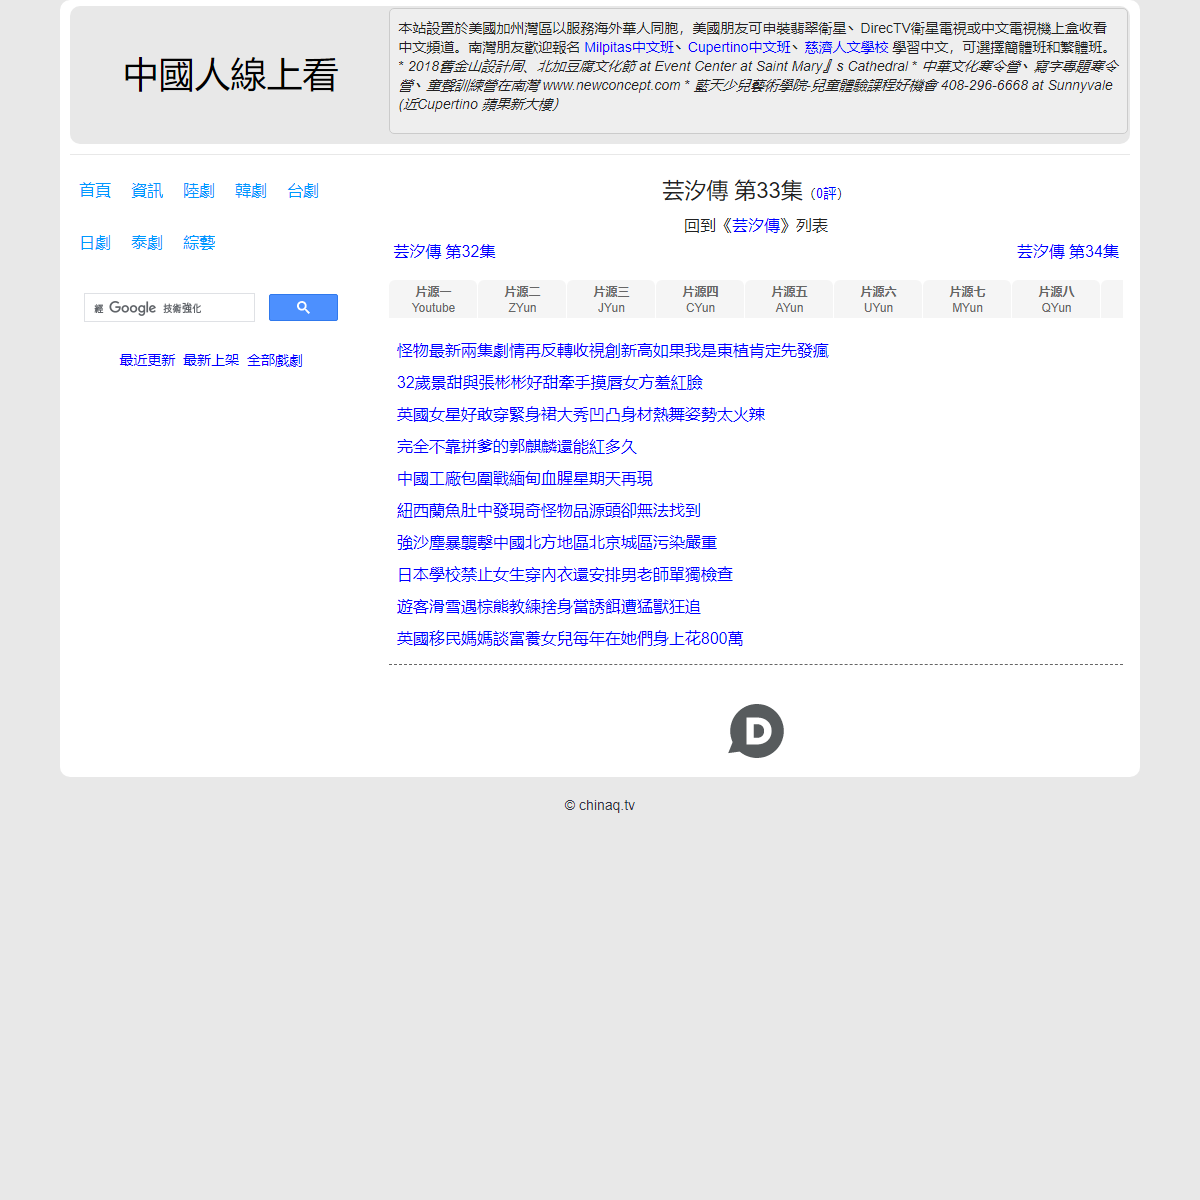 A complete backup of https://chinaq.tv/cn180625/33.html